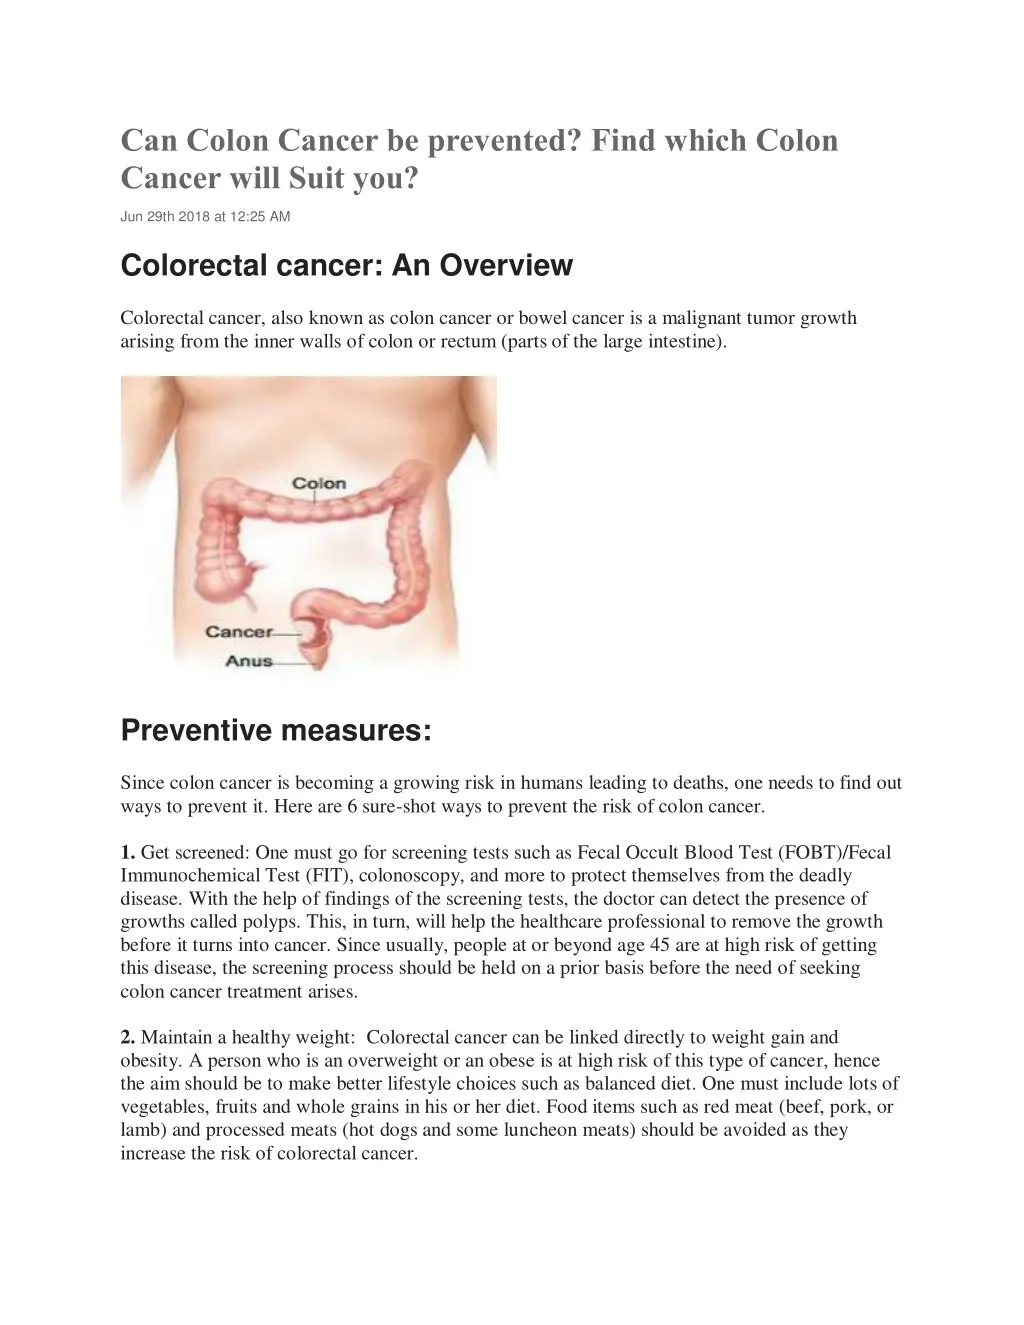 can colon cancer be prevented find which colon